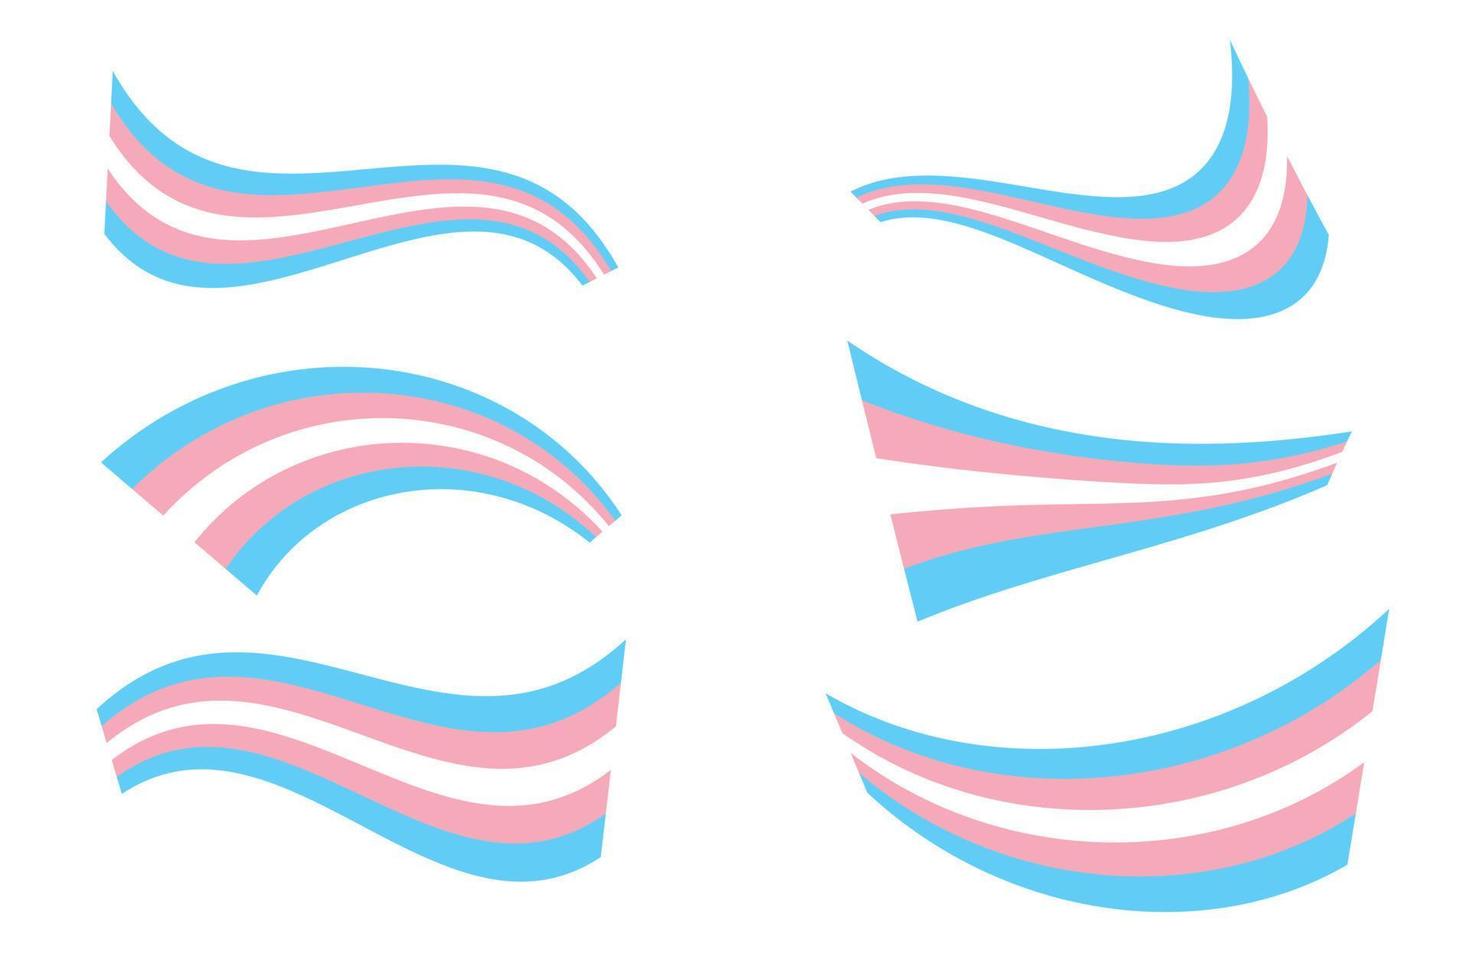 Transgender pride flag -  light blue, pink and white striped pride flag, symbol of the transgender community. LGBT symbols set collection of different twisted wrapped shapes flags vector